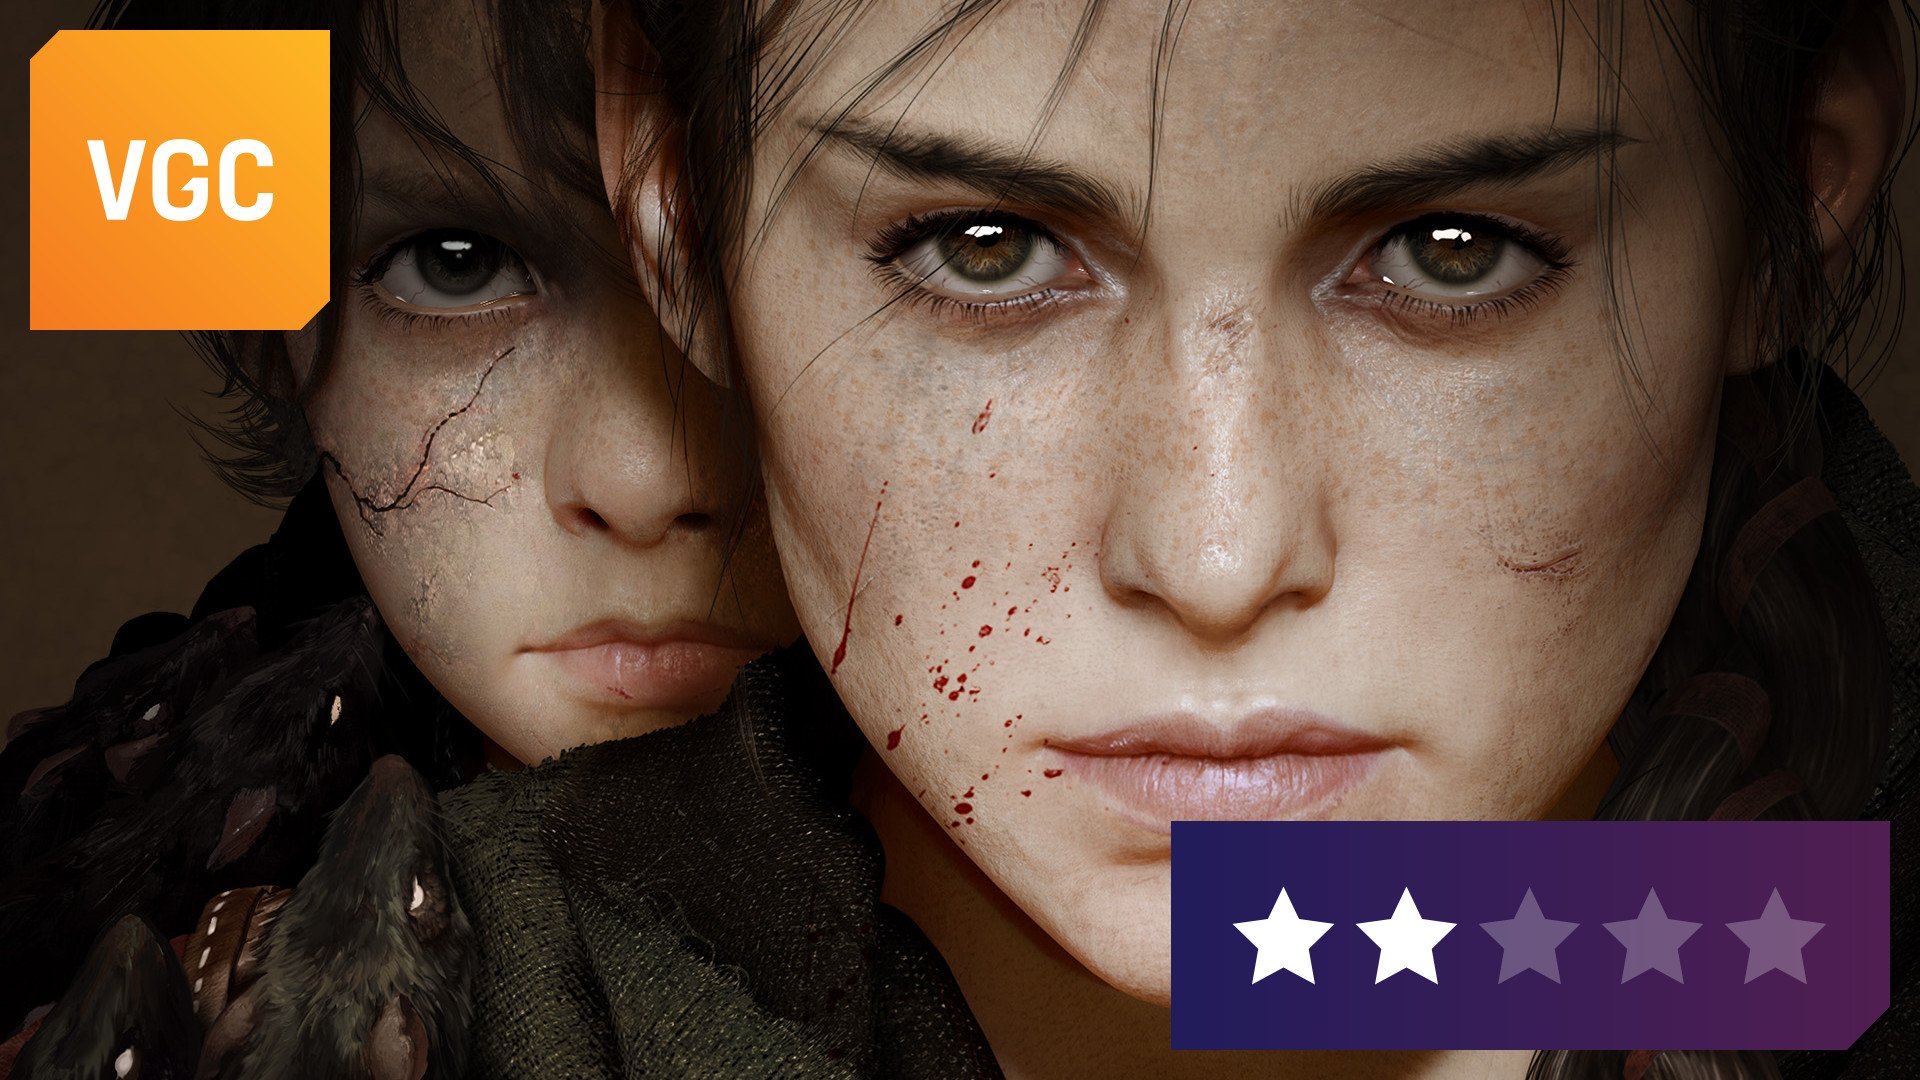 A Plague Tale: Requiem Review: Ambition Plagued by Inconsistency